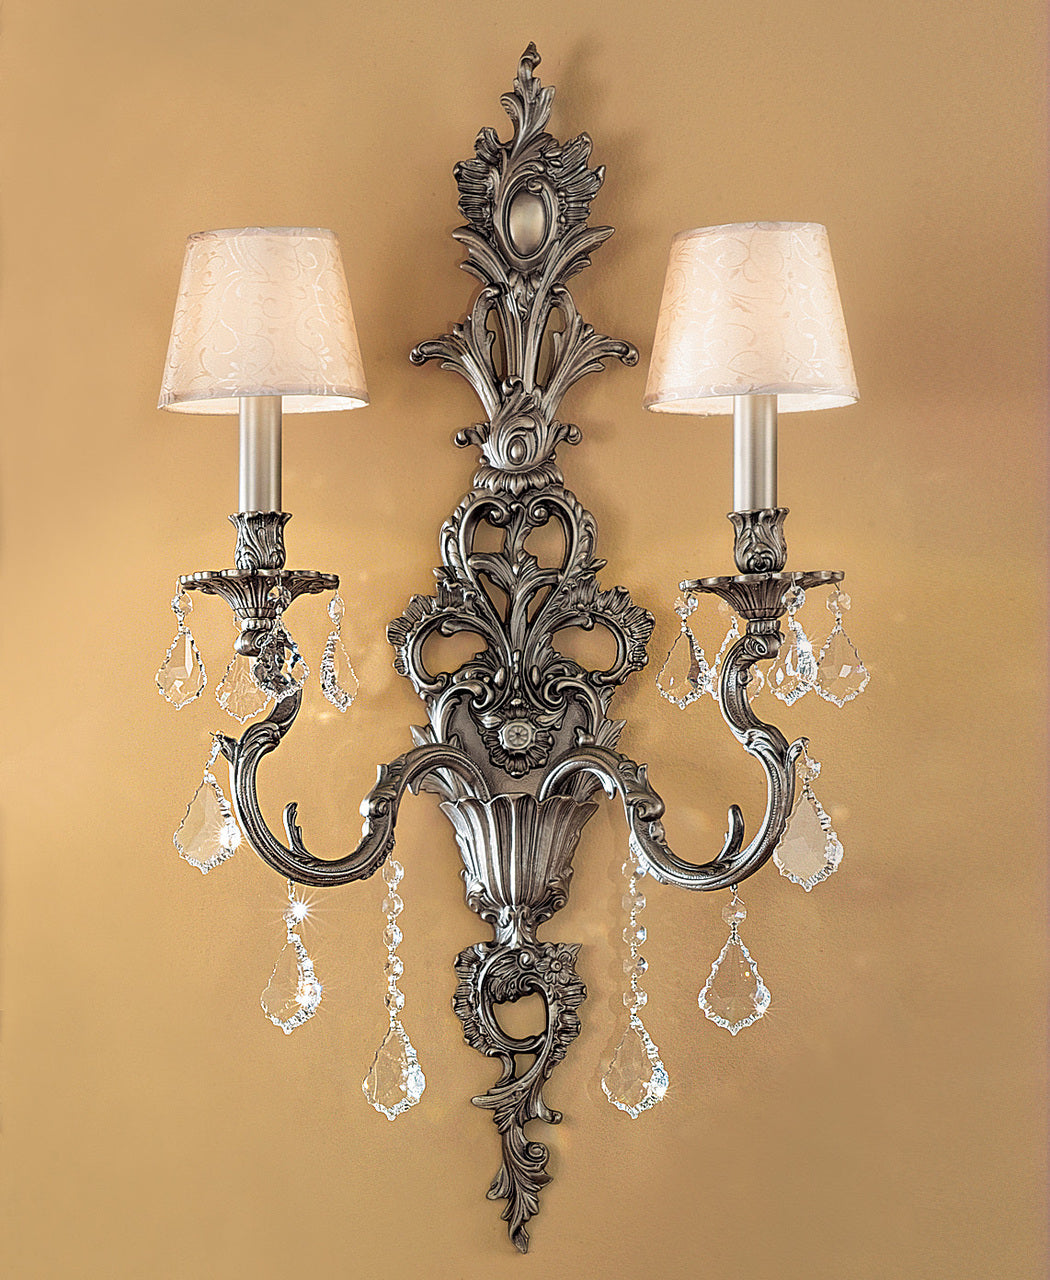 Classic Lighting 57342 FG CBK Majestic Crystal Wall Sconce in French Gold (Imported from Spain)